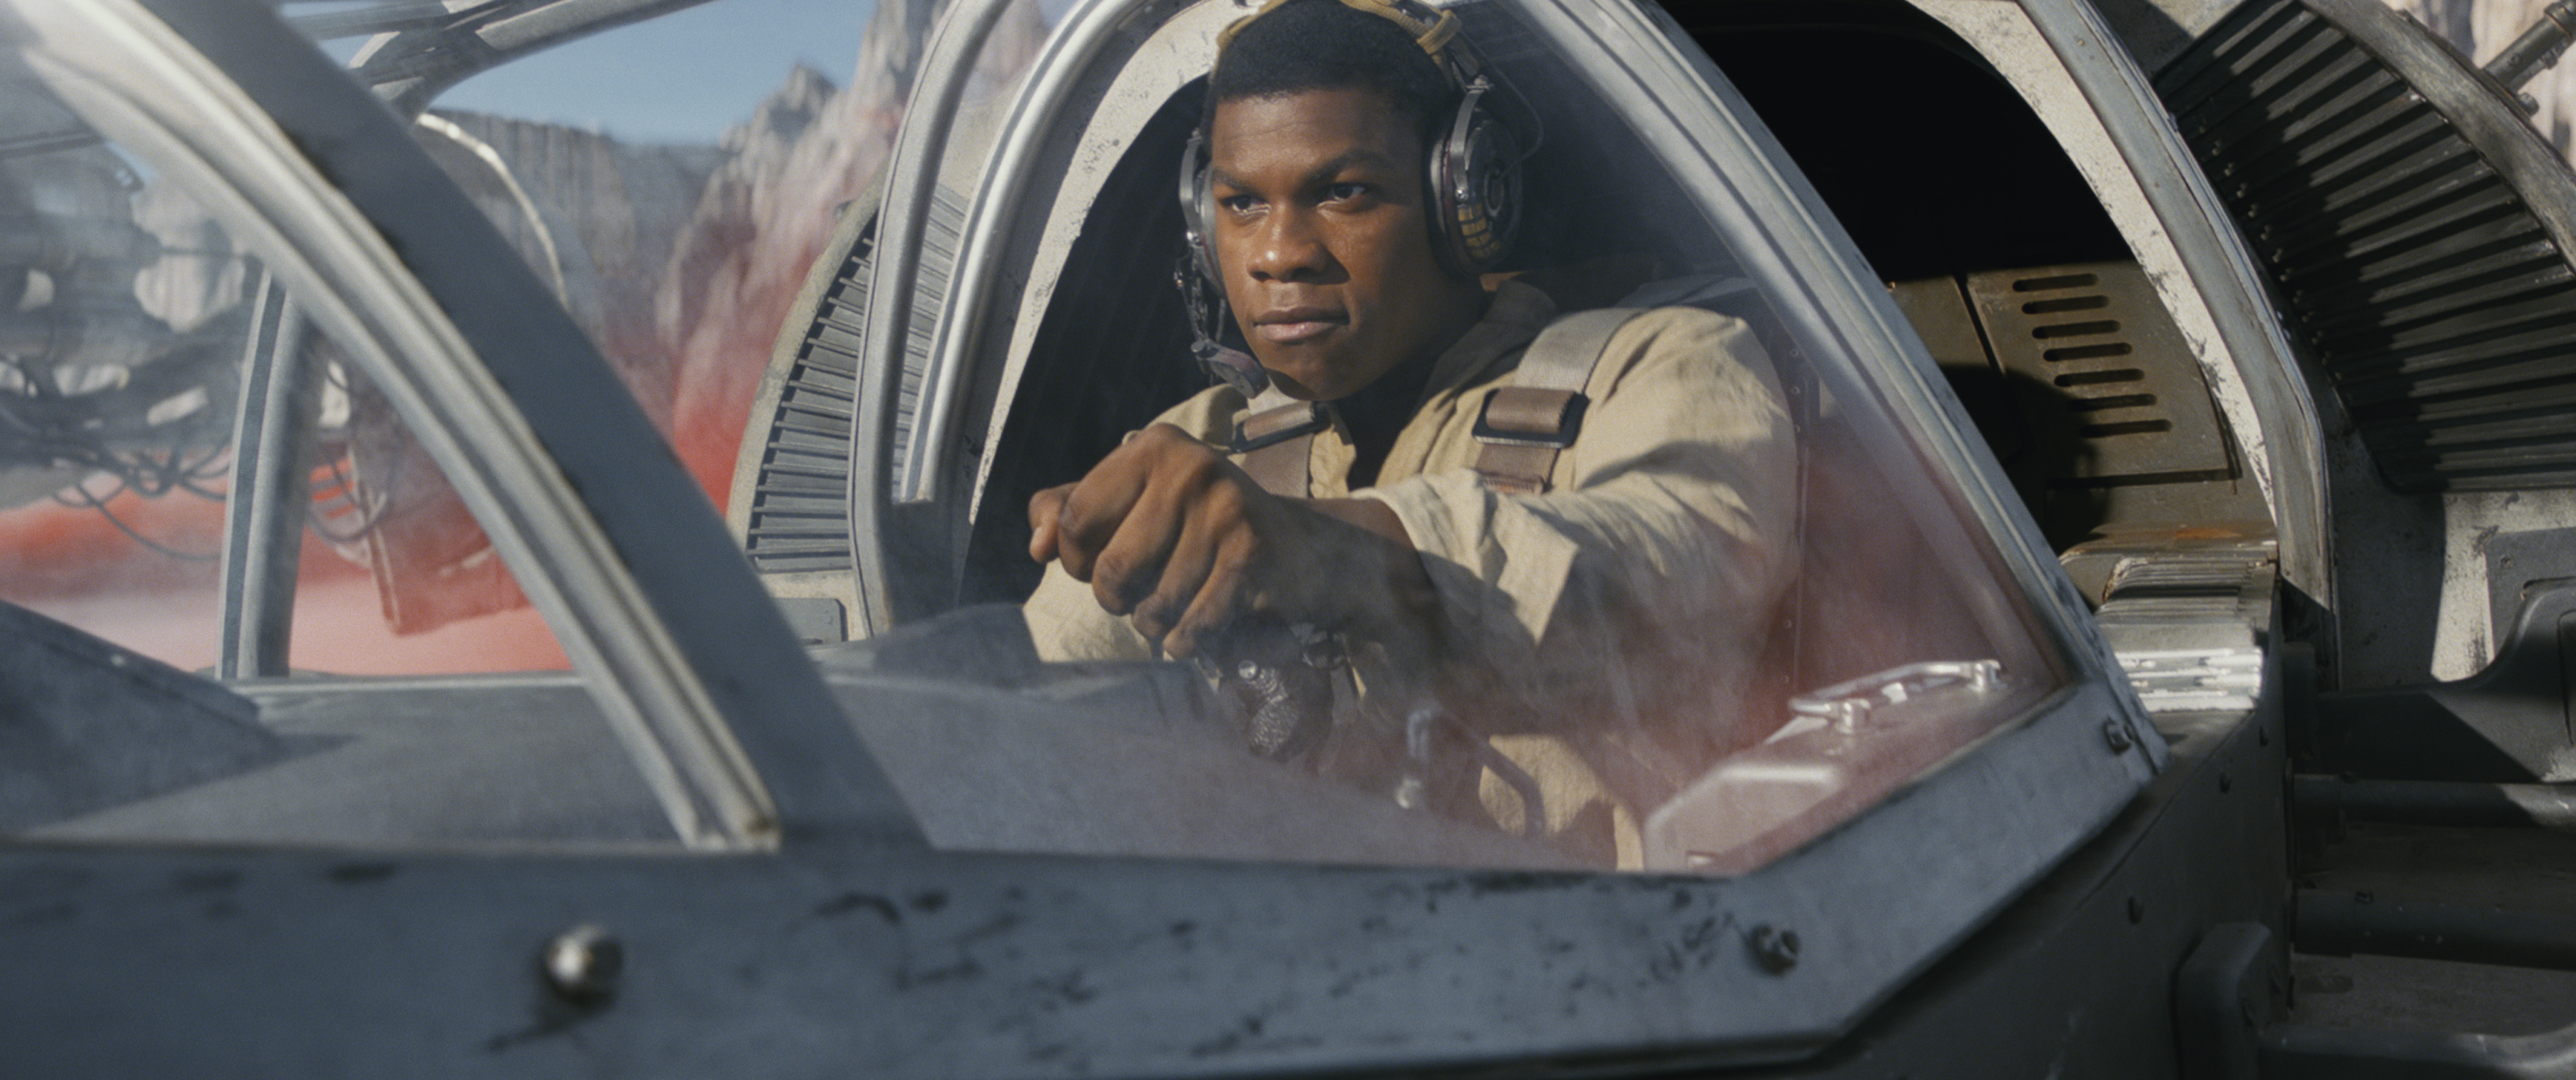 Moses Ingram: Being in Star Wars feels too big to fathom